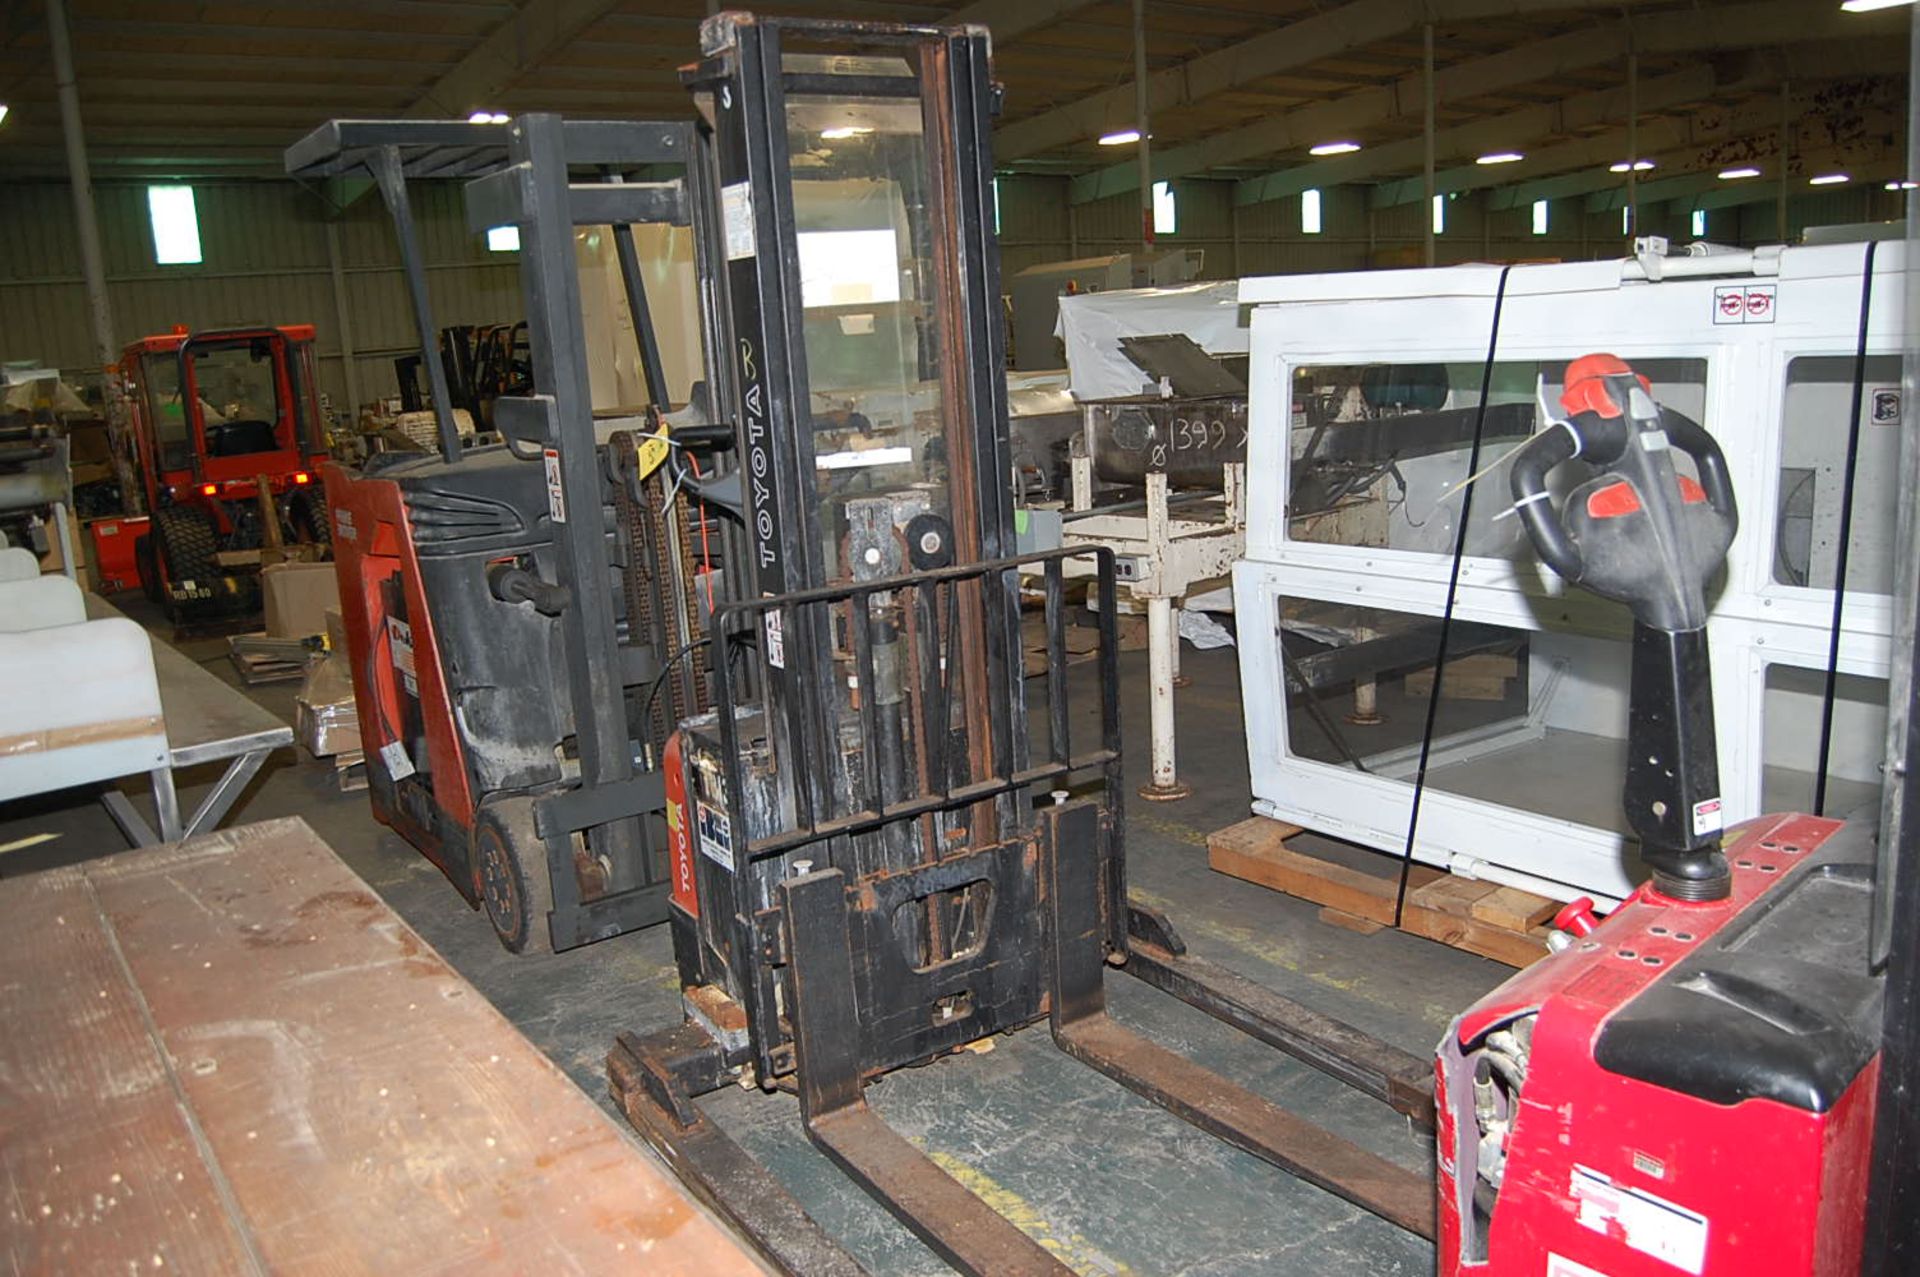 Toyota Model #6BWS13-40105 Electric Straddle Type Walk Behind Fork Lift Truck, Rated 2500 lbs. - Image 2 of 2